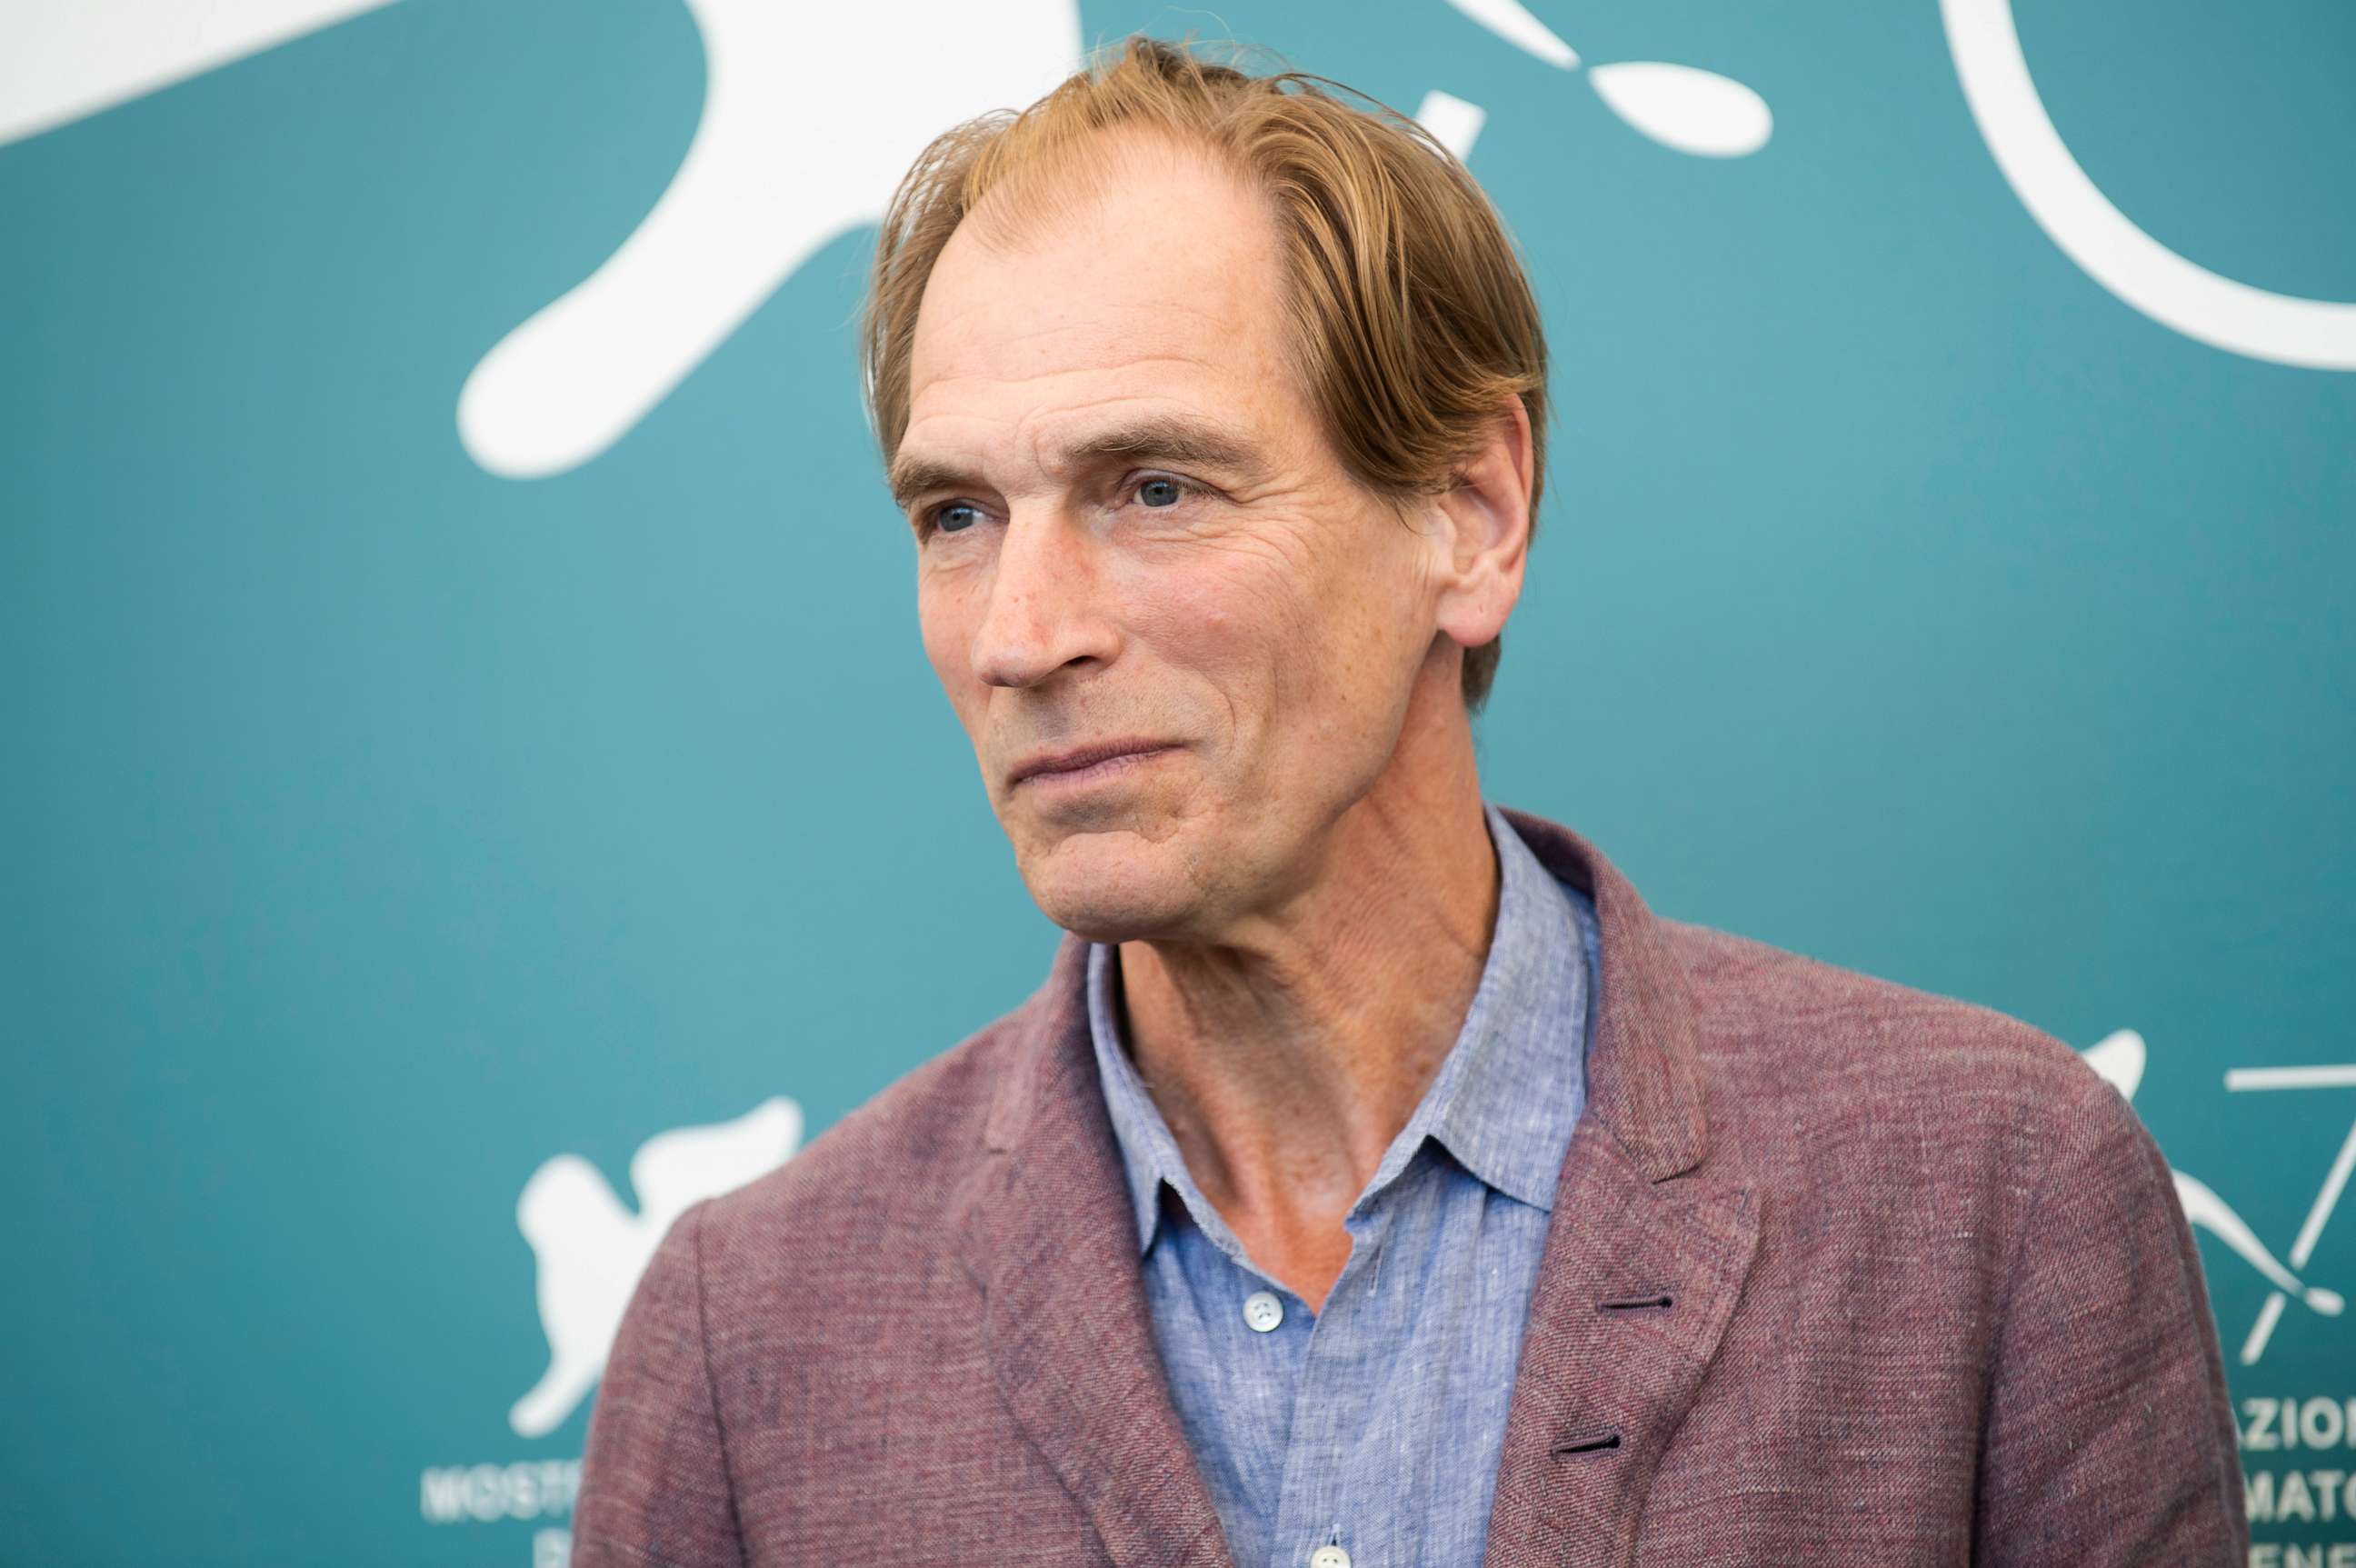 PHOTO: In this file photo, actor Julian Sands poses for photographers at the Venice Film Festival in Venice, Italy, on Sept. 3, 2019.